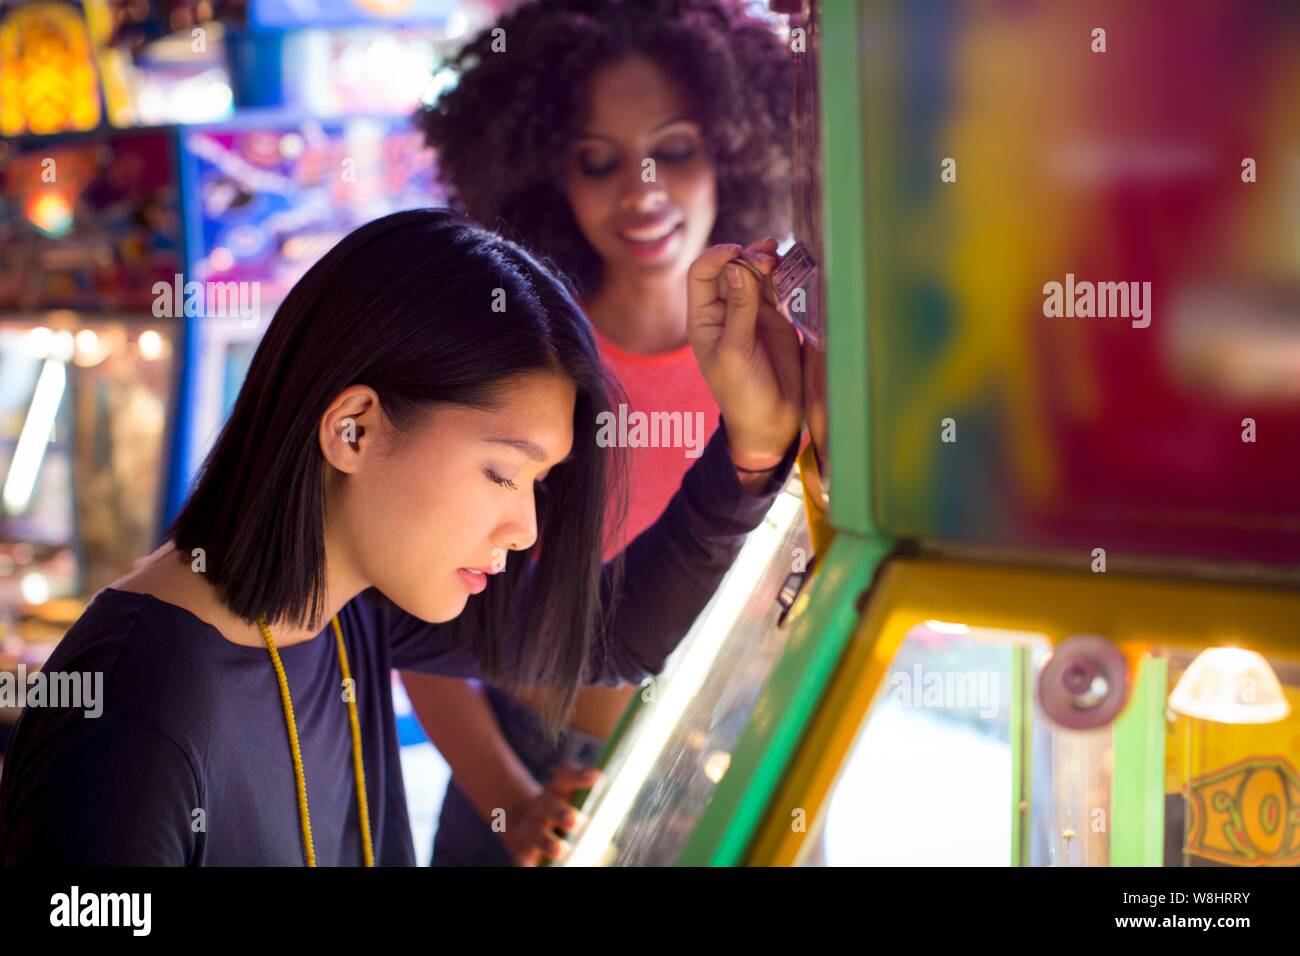 Two young women playing arcade game at fun fair. Stock Photo